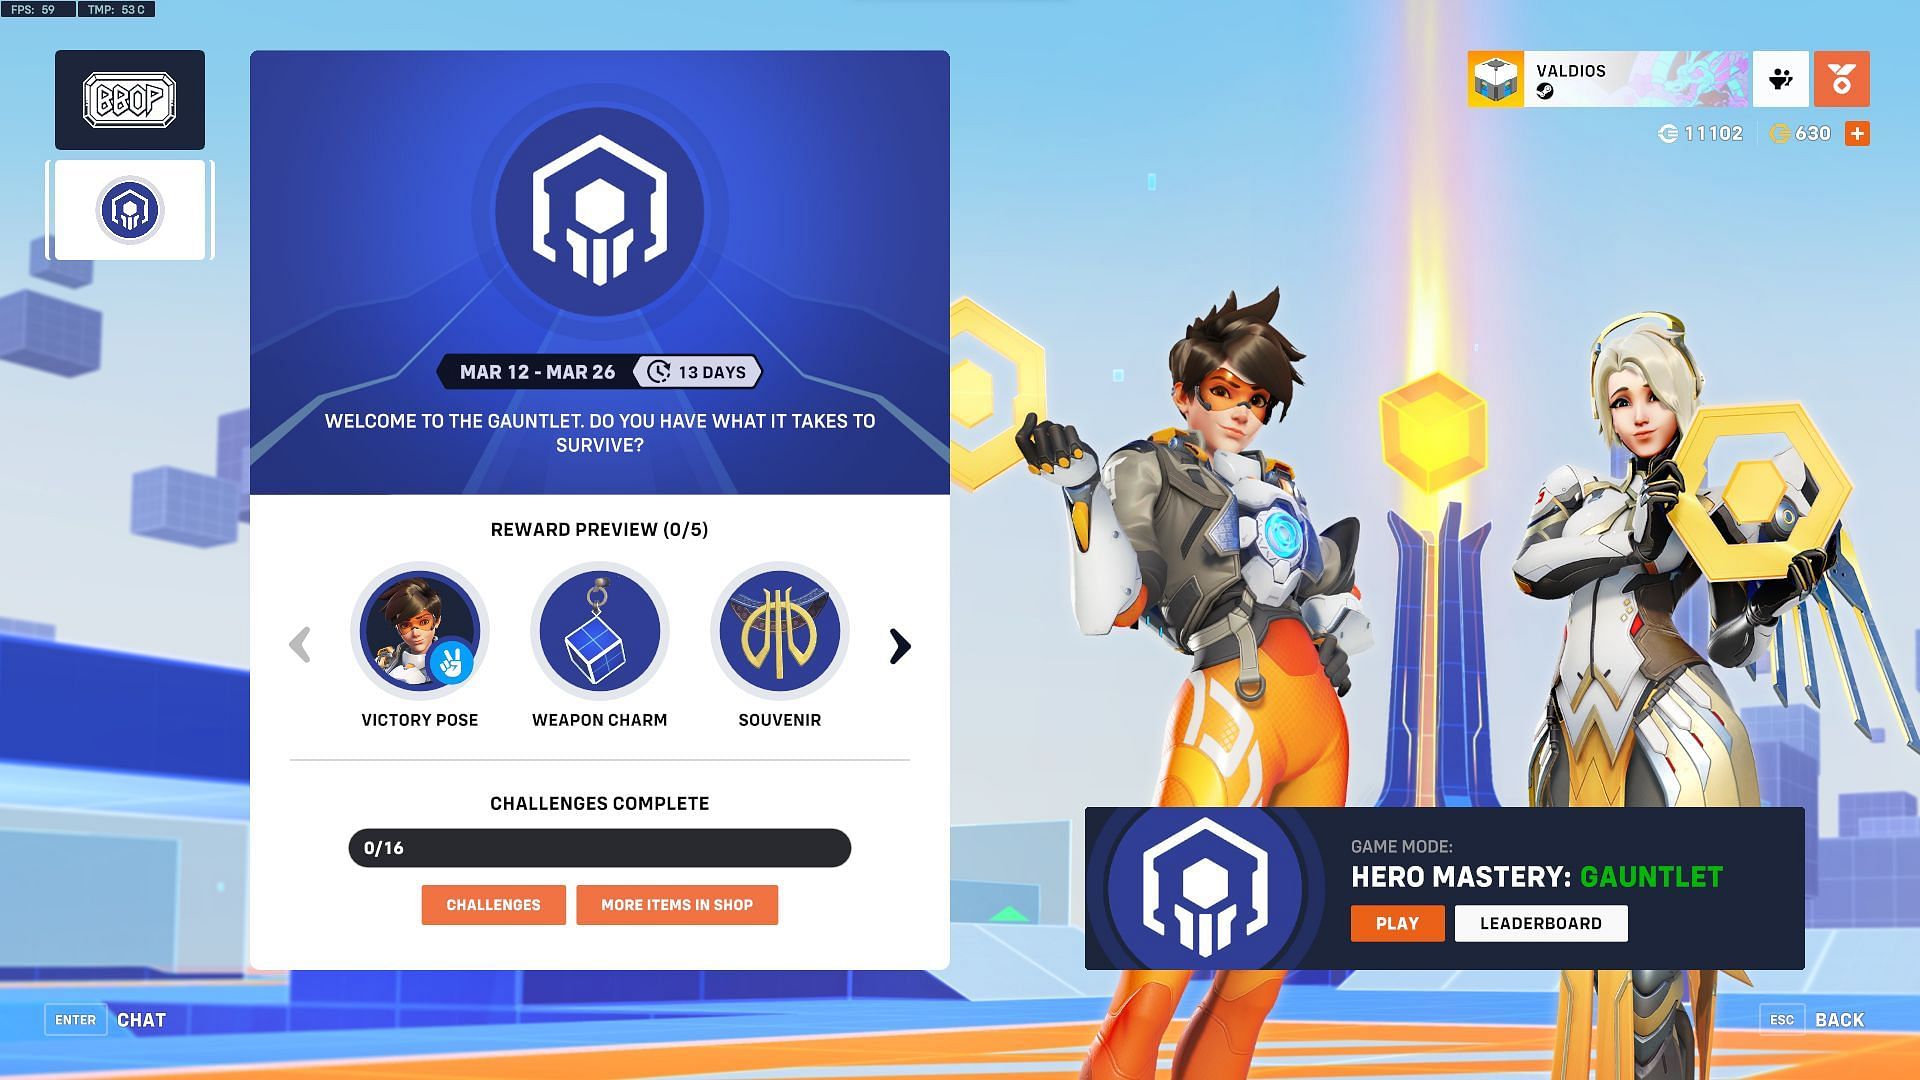 The Overwatch 2 Hero Mastery Gauntlet mode home screen (Image via Blizzard Entertainment)